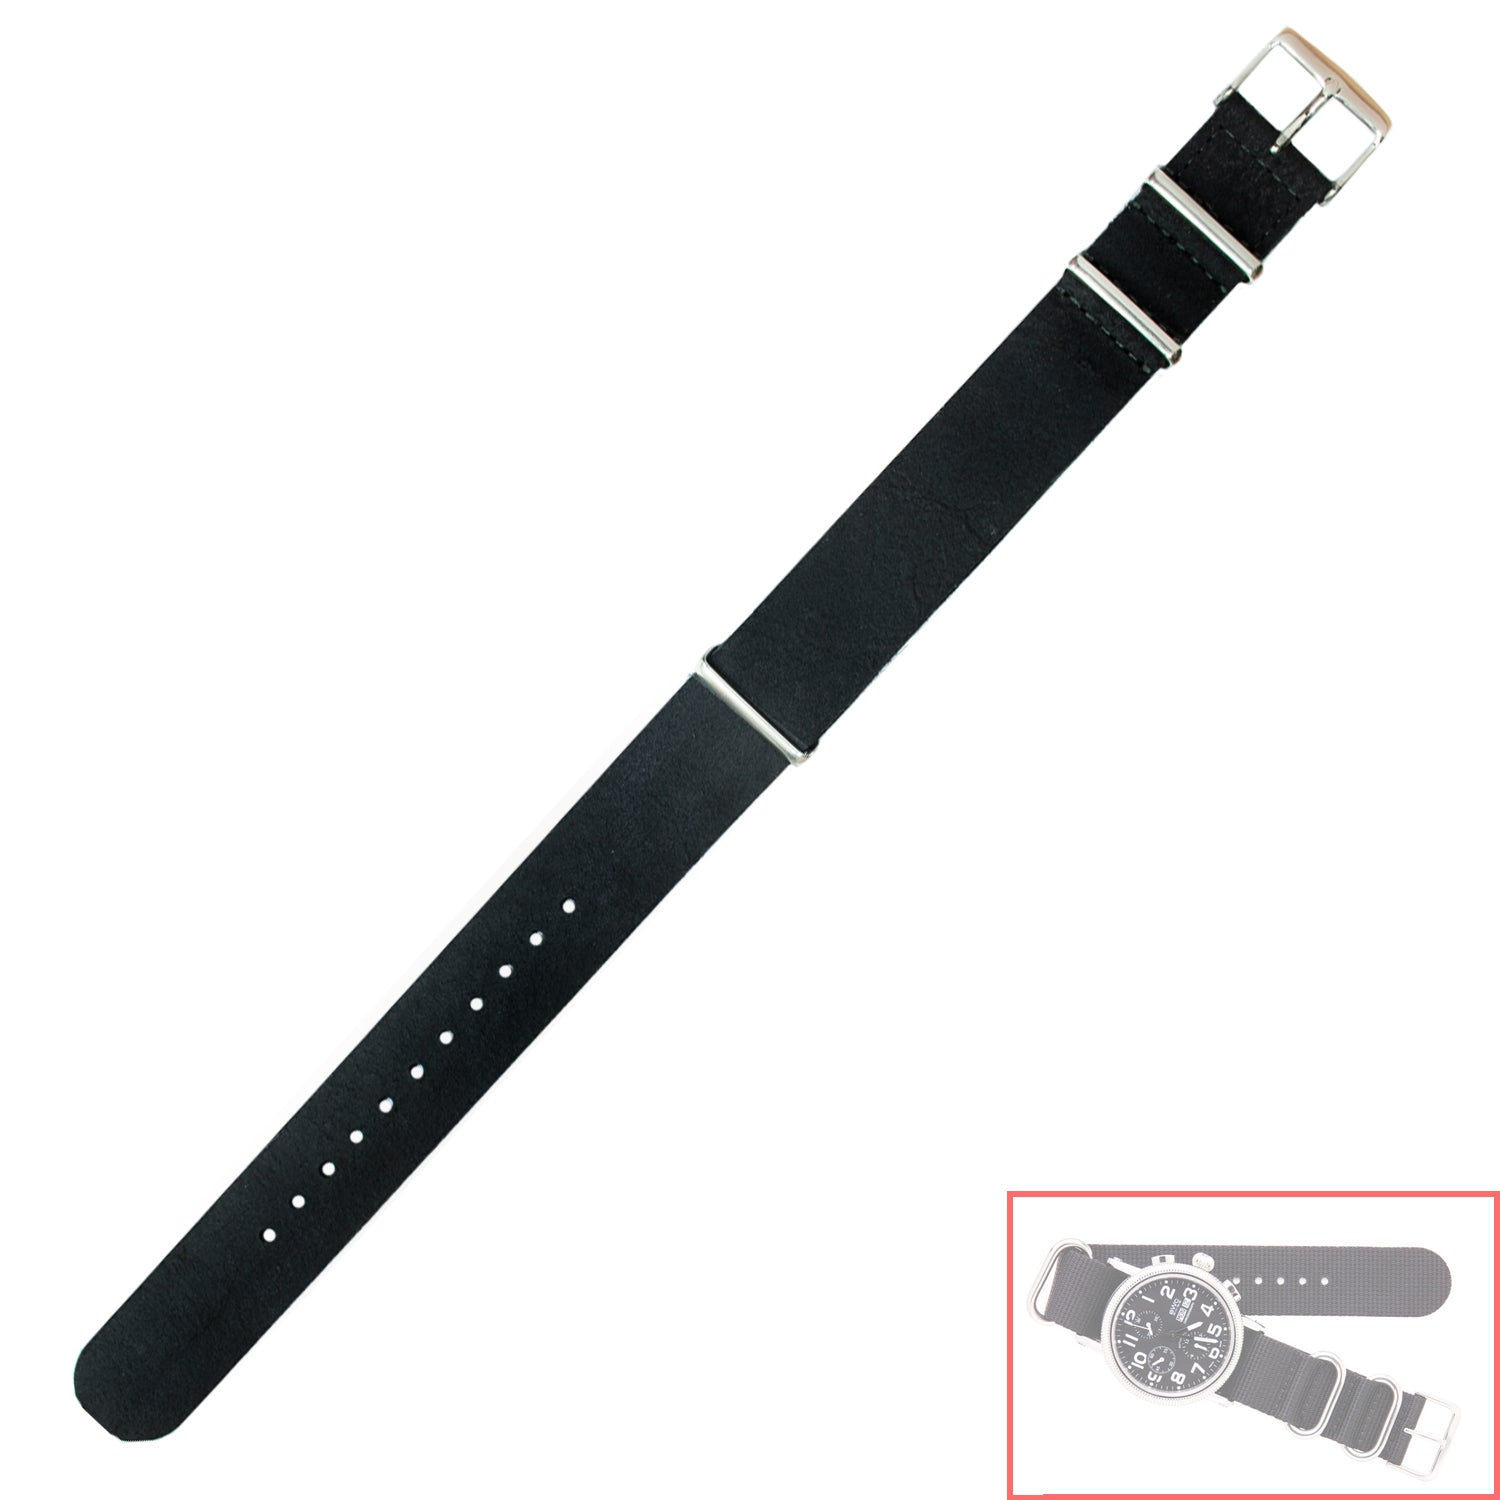 NSL No. 503 Genuine Leather Nato Style Straps with Steel Buckle  (20mm x 20mm)